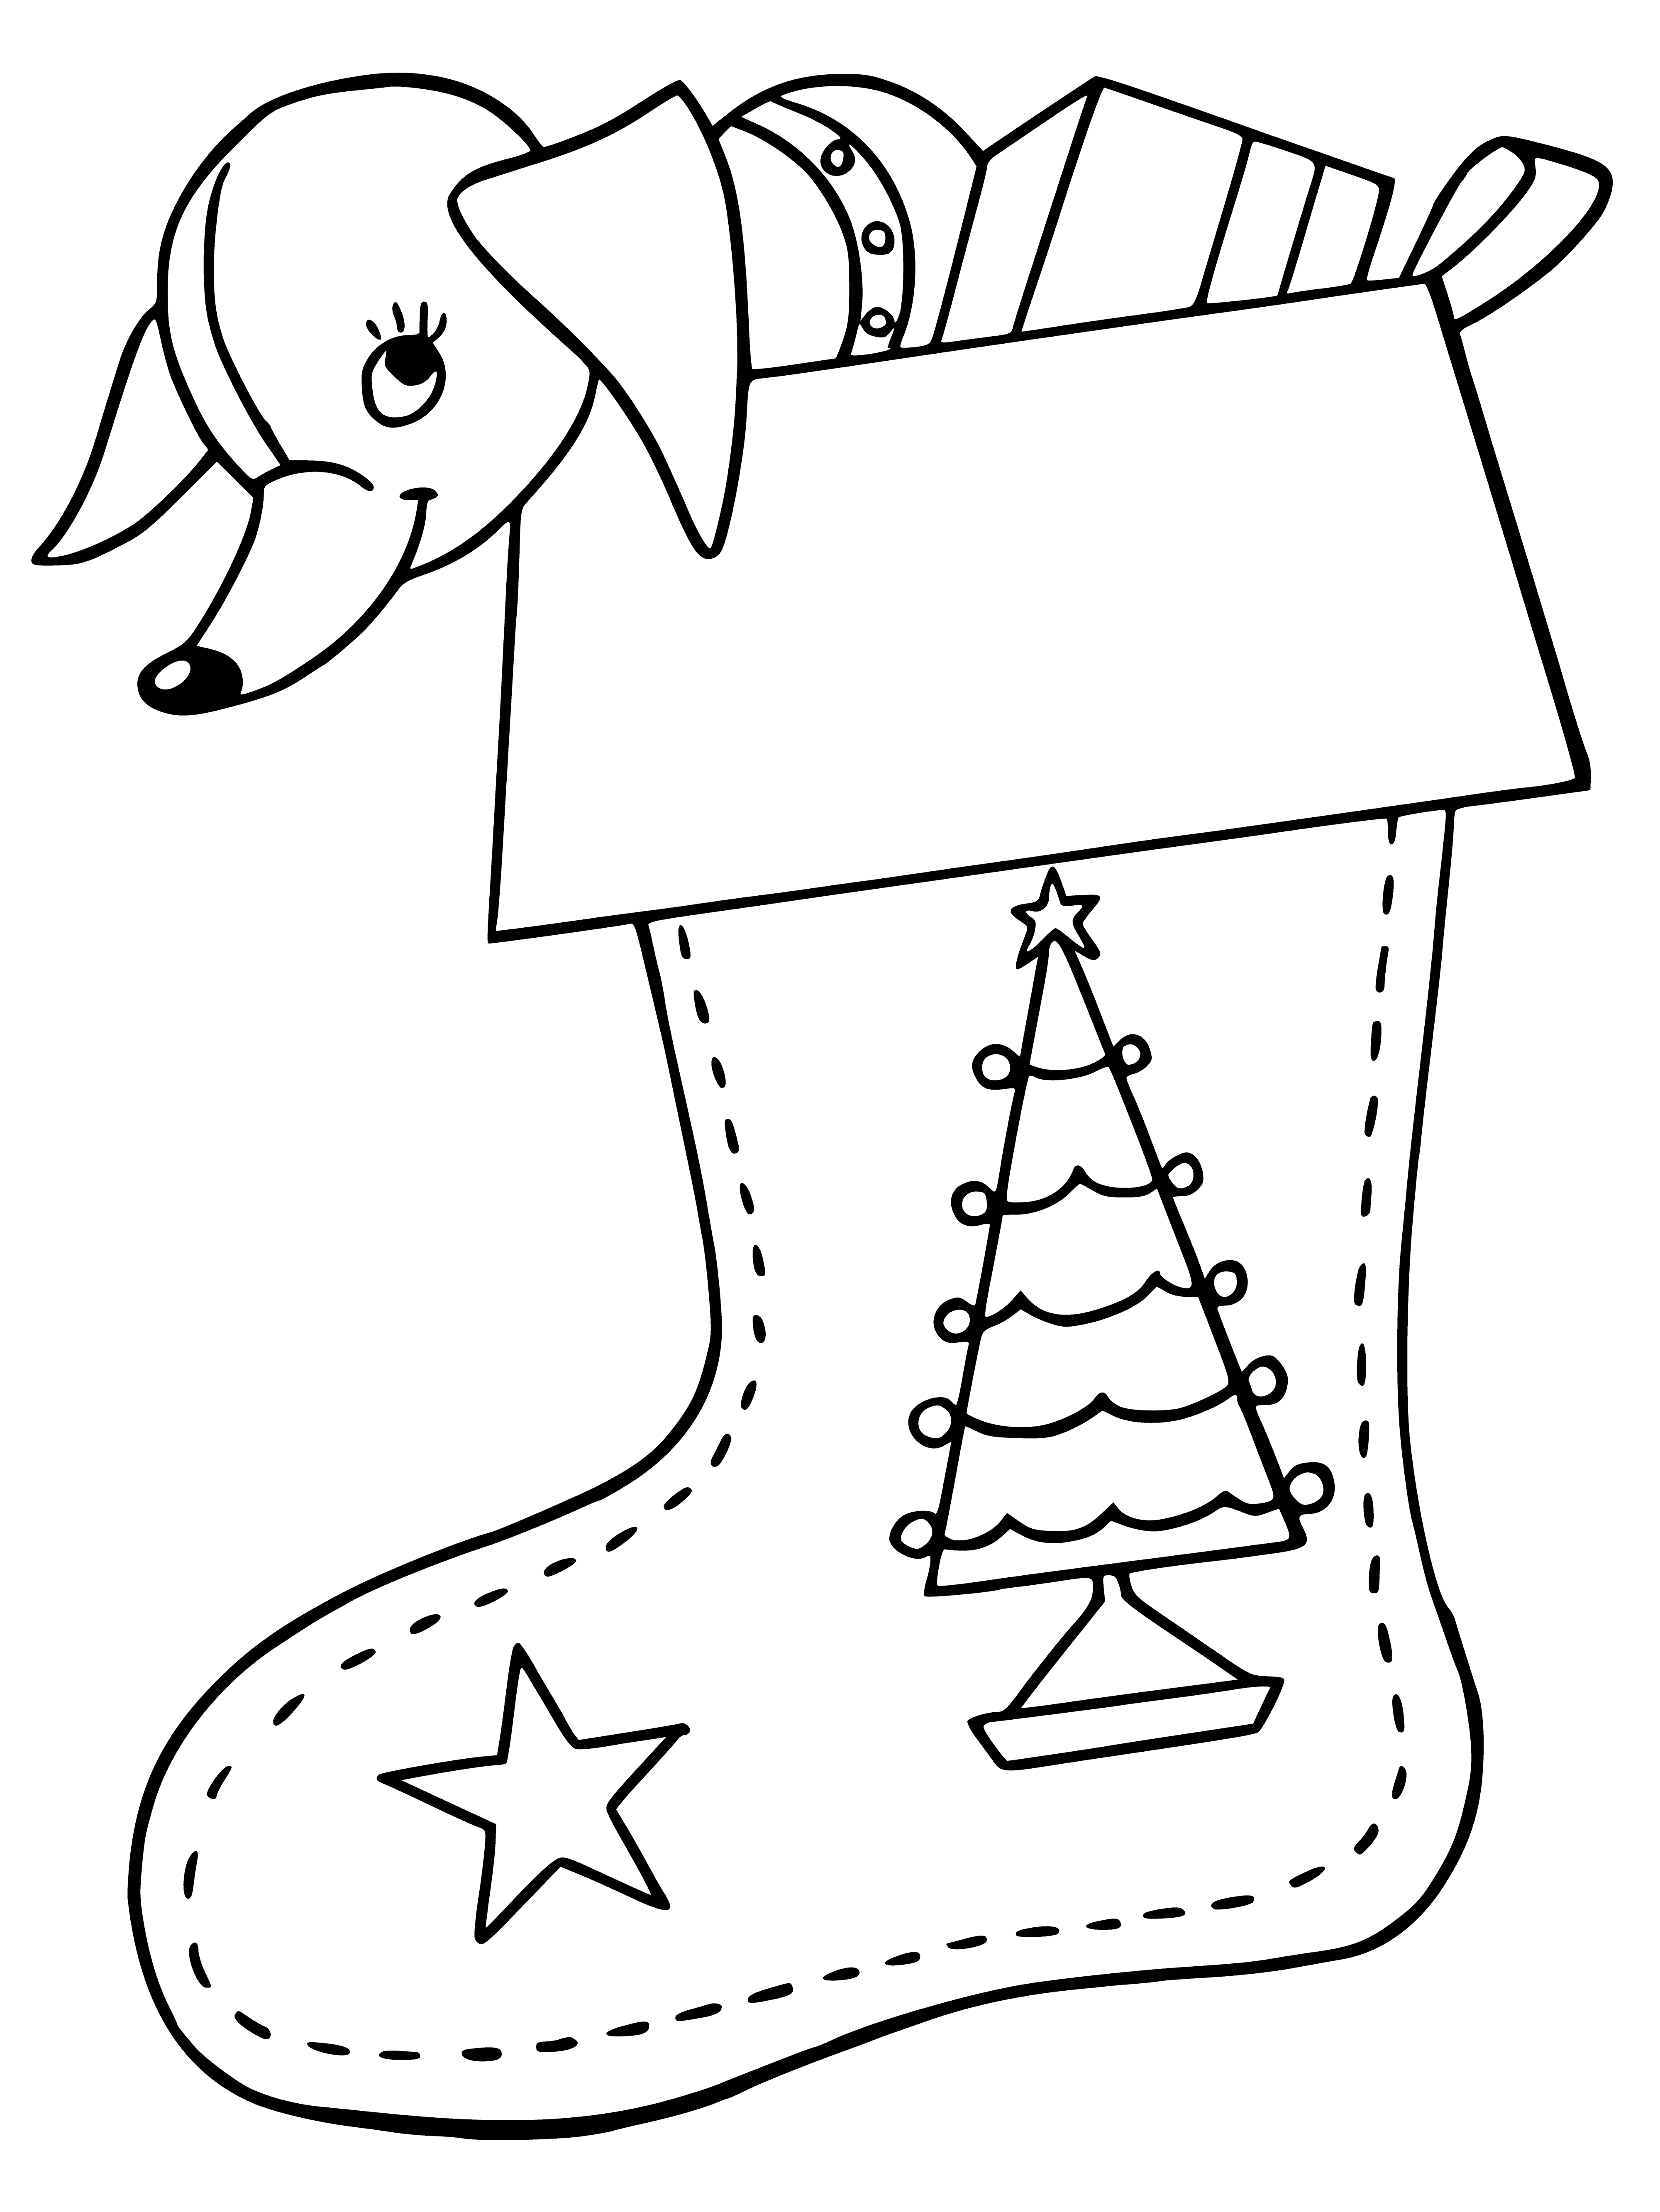 coloring page: Christmas socks: red & white, one holds a surprise gift inside - green! #seasonofgifts